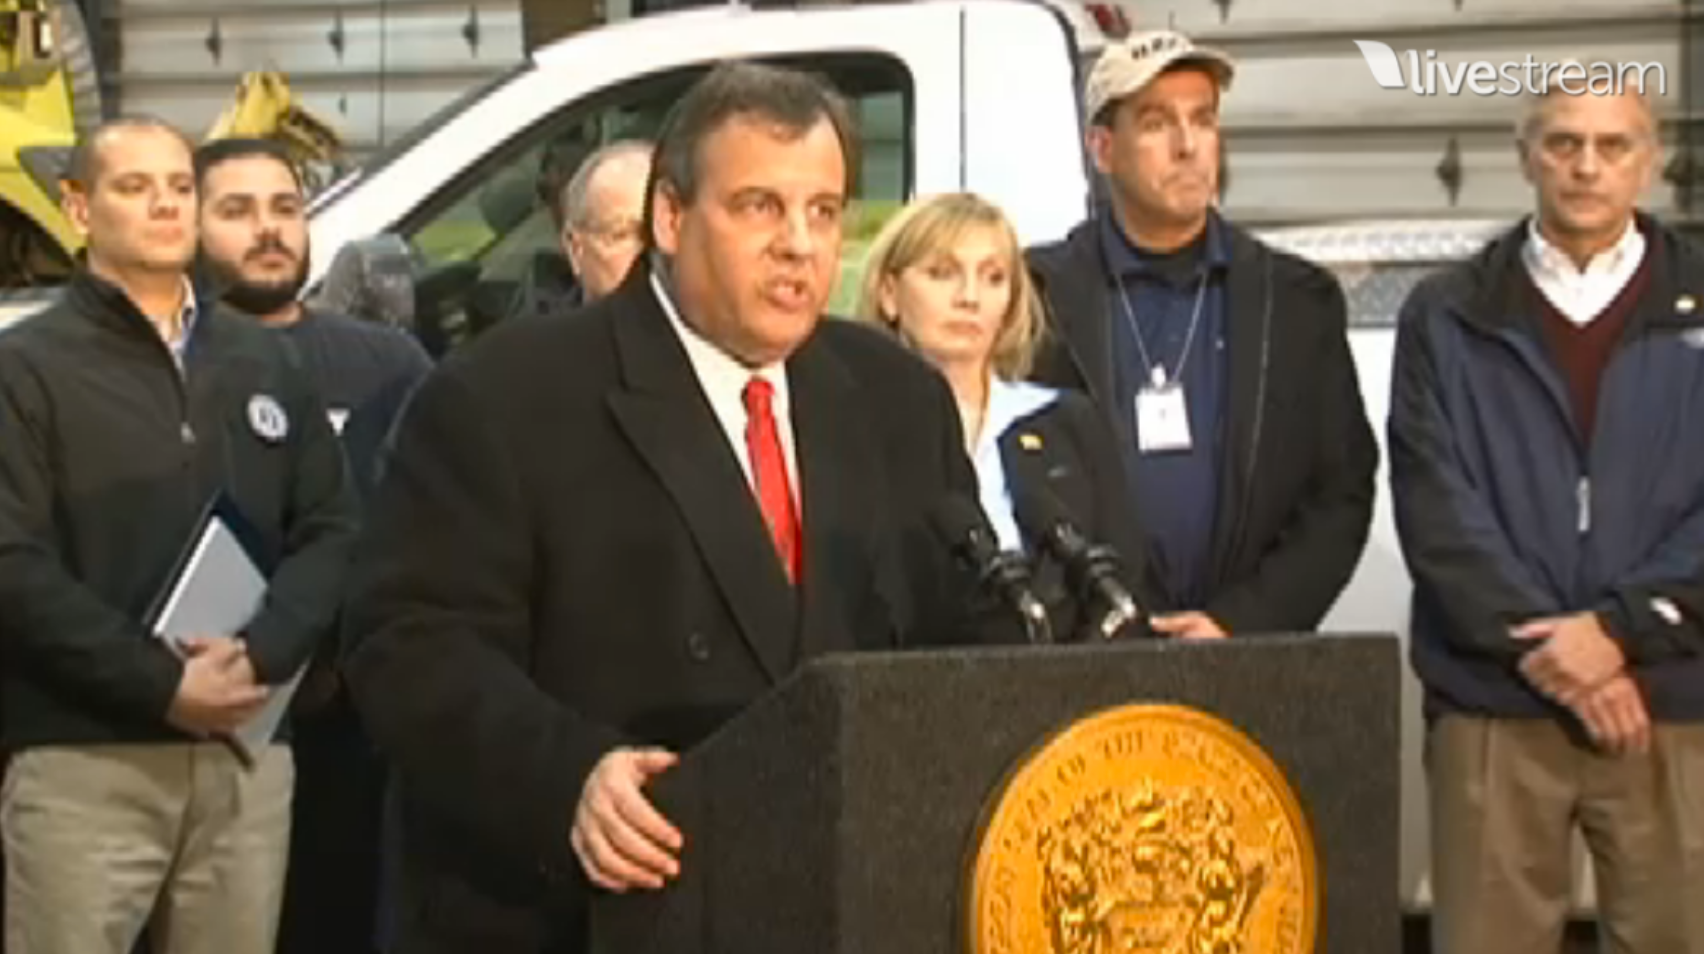  Gov. Christie Christie speaks this evening, declaring a state of emergency.  